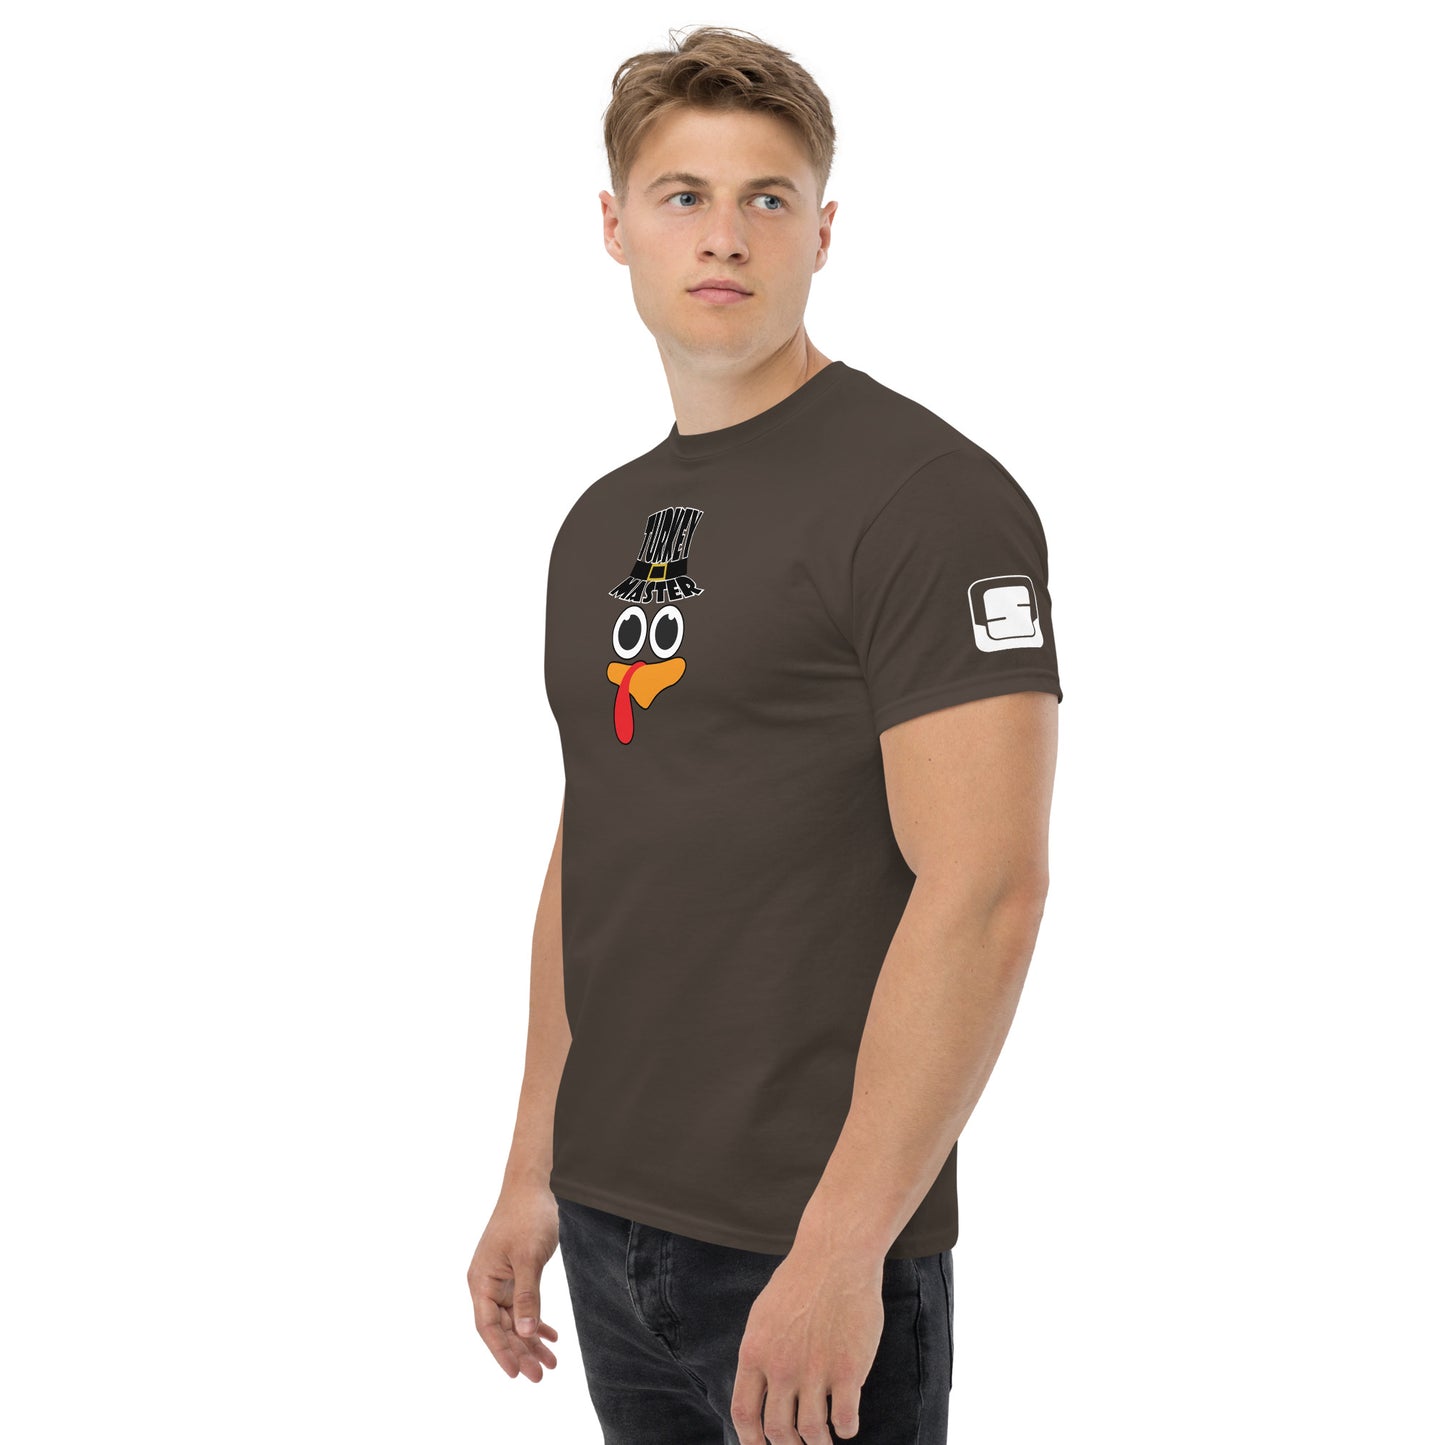 A man with short blonde hair is wearing a brown t-shirt featuring a playful turkey graphic. The turkey has cartoonish eyes, an orange beak, and a red snood, along with a black hat that reads "TURKEY MASTER" in bold letters. On the left sleeve, there's a distinctive rectangular logo patch. The man is standing in a relaxed pose, looking off to the side, against a white background.